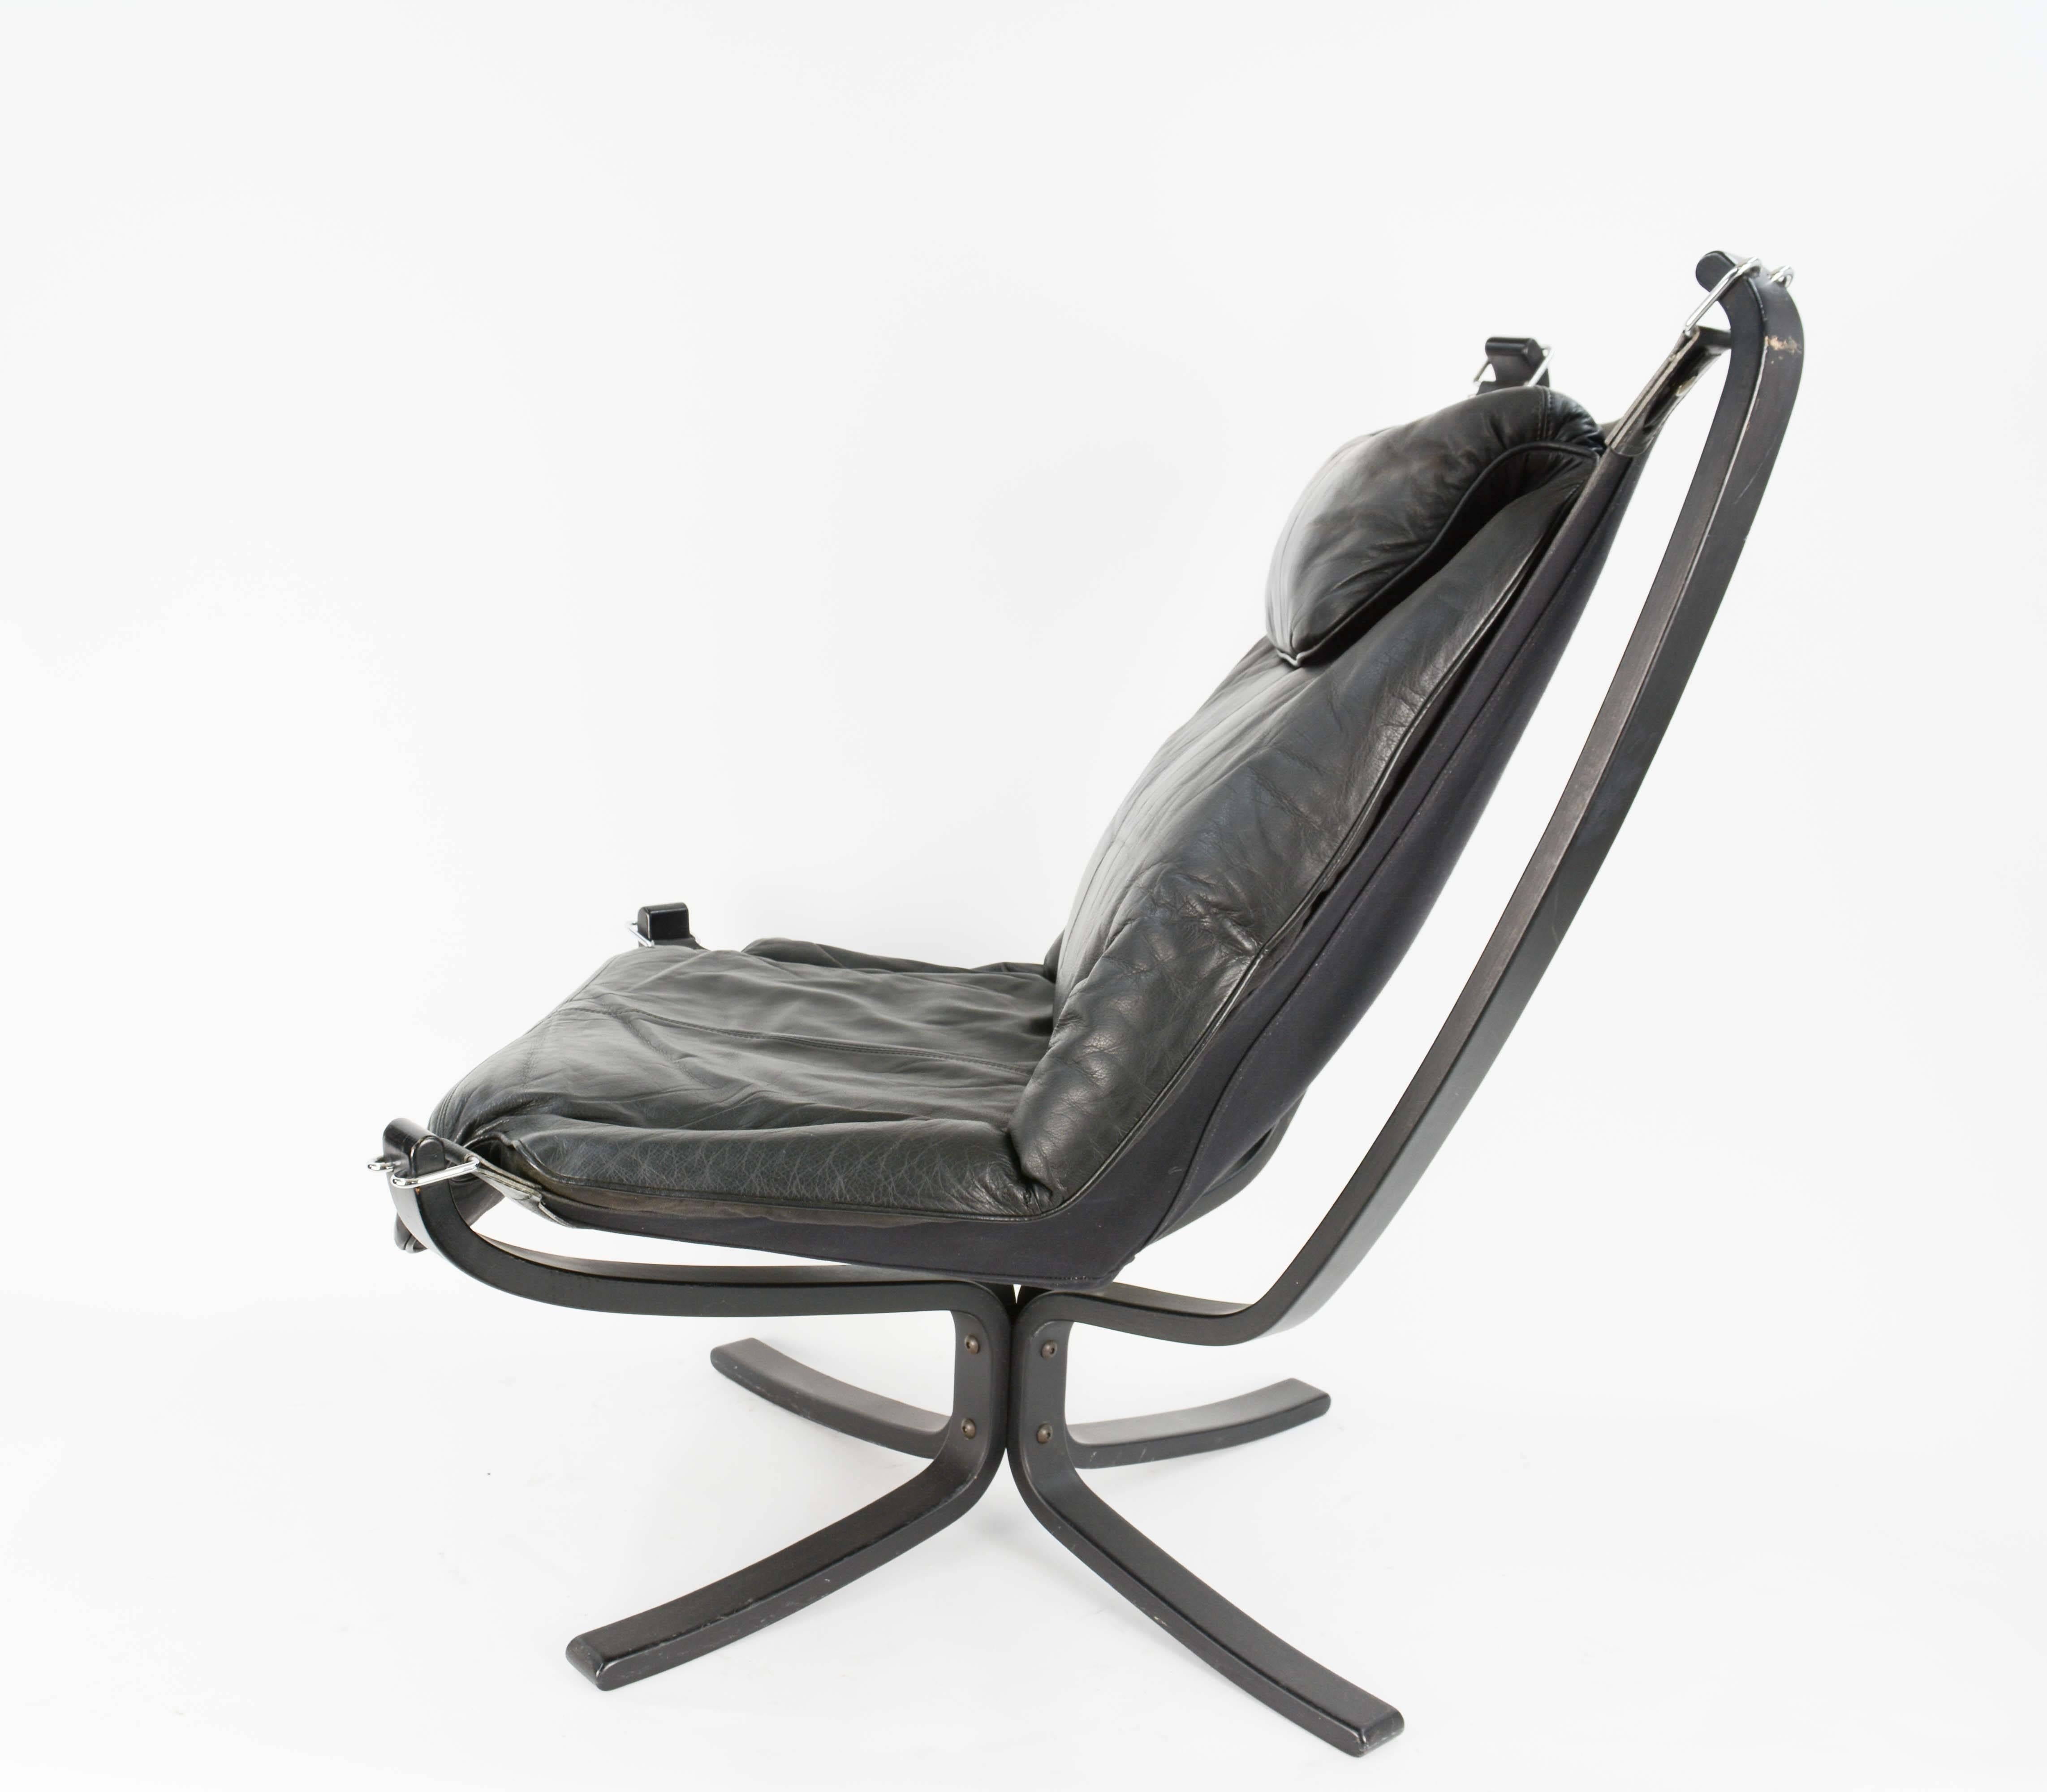 Iconic Falcon chairs designed by Sigurd Resell (1920-2010) by Vatne Møbler, Norway.
Black bended wooden frame, stretched with canvas, great patinated black leather cushions and slings. The slings are attached with chrome hardware. 

We have up to